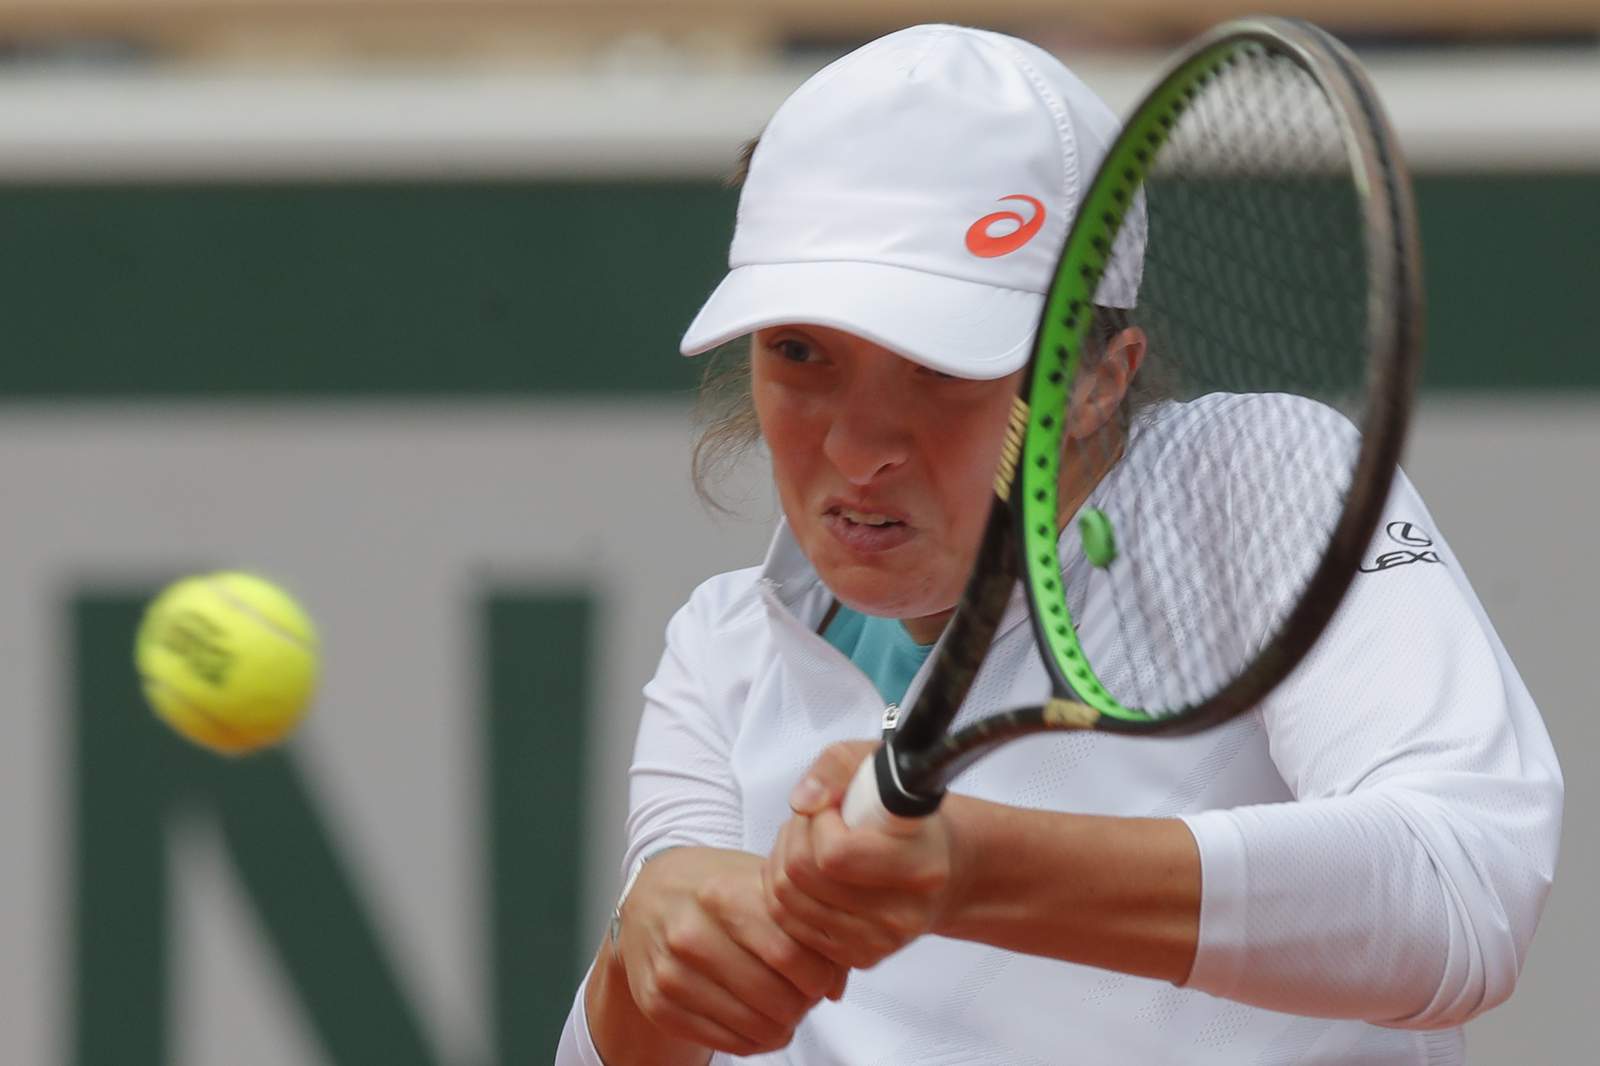 The Latest: Pavic and Soares into French Open doubles final